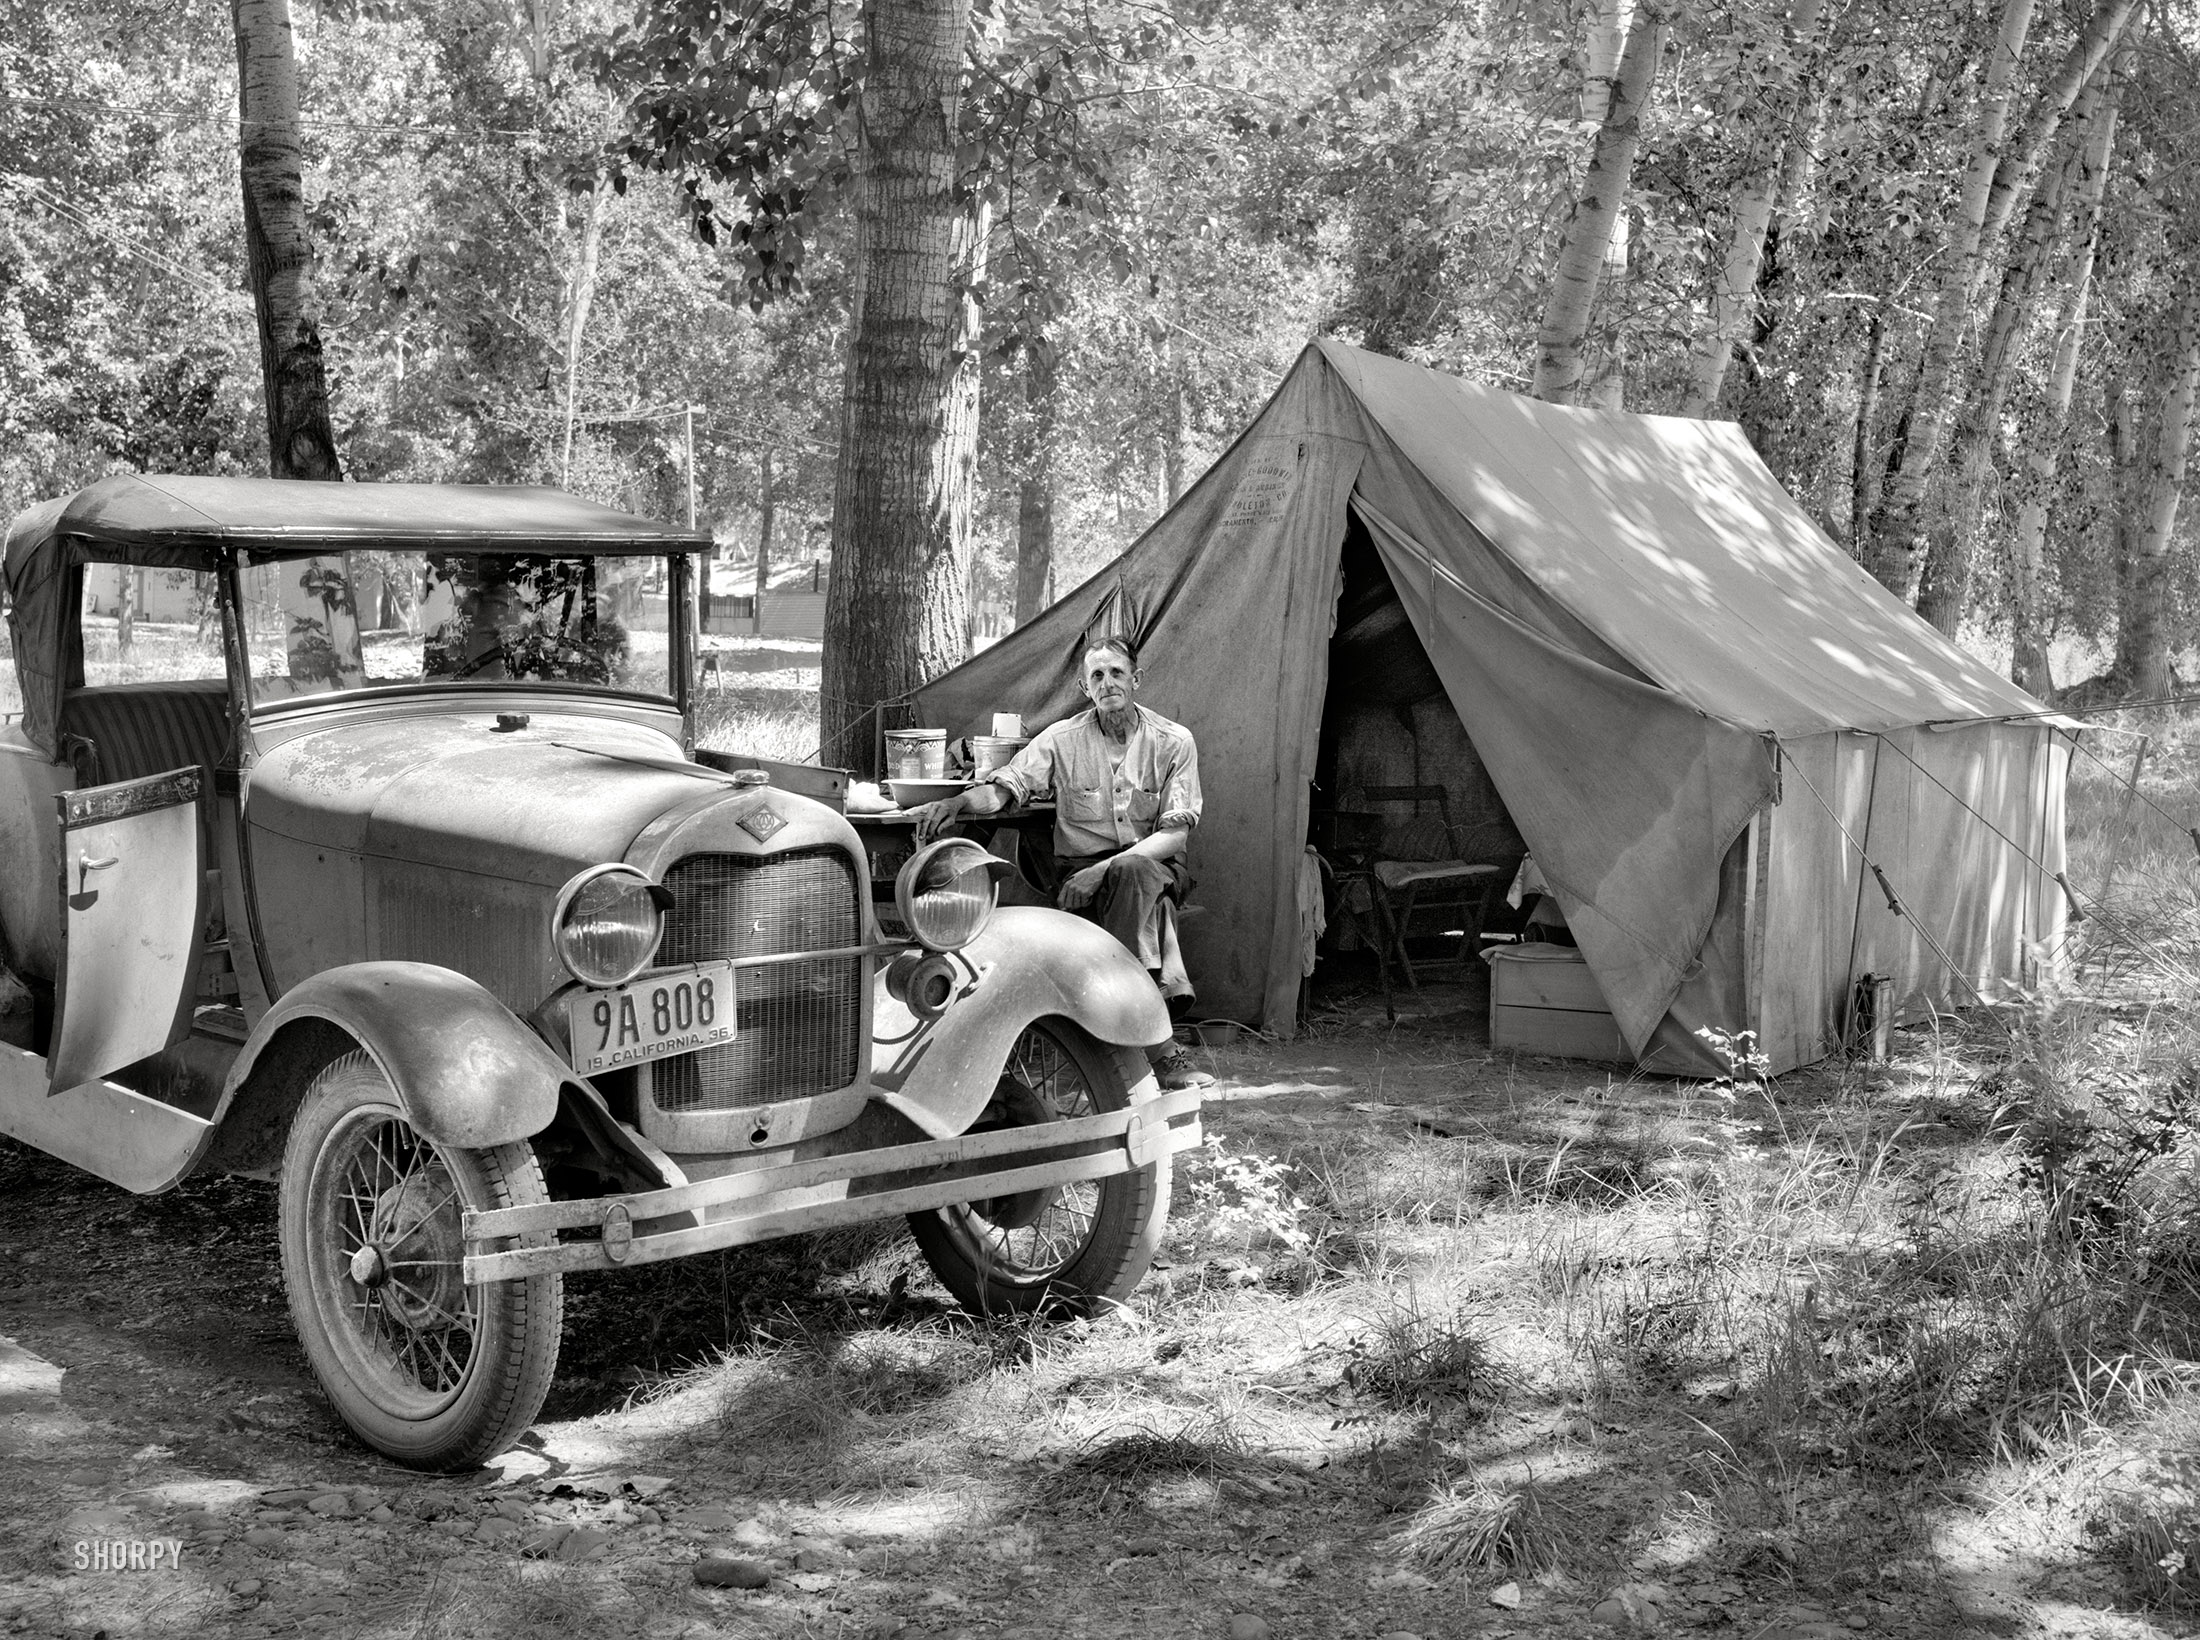 July 1936. Yakima, Washington. "Fruit tramps from California who have come to the Yakima Valley for apple thinning." Medium-format nitrate negative by Arthur Rothstein for the Resettlement Administration. View full size.